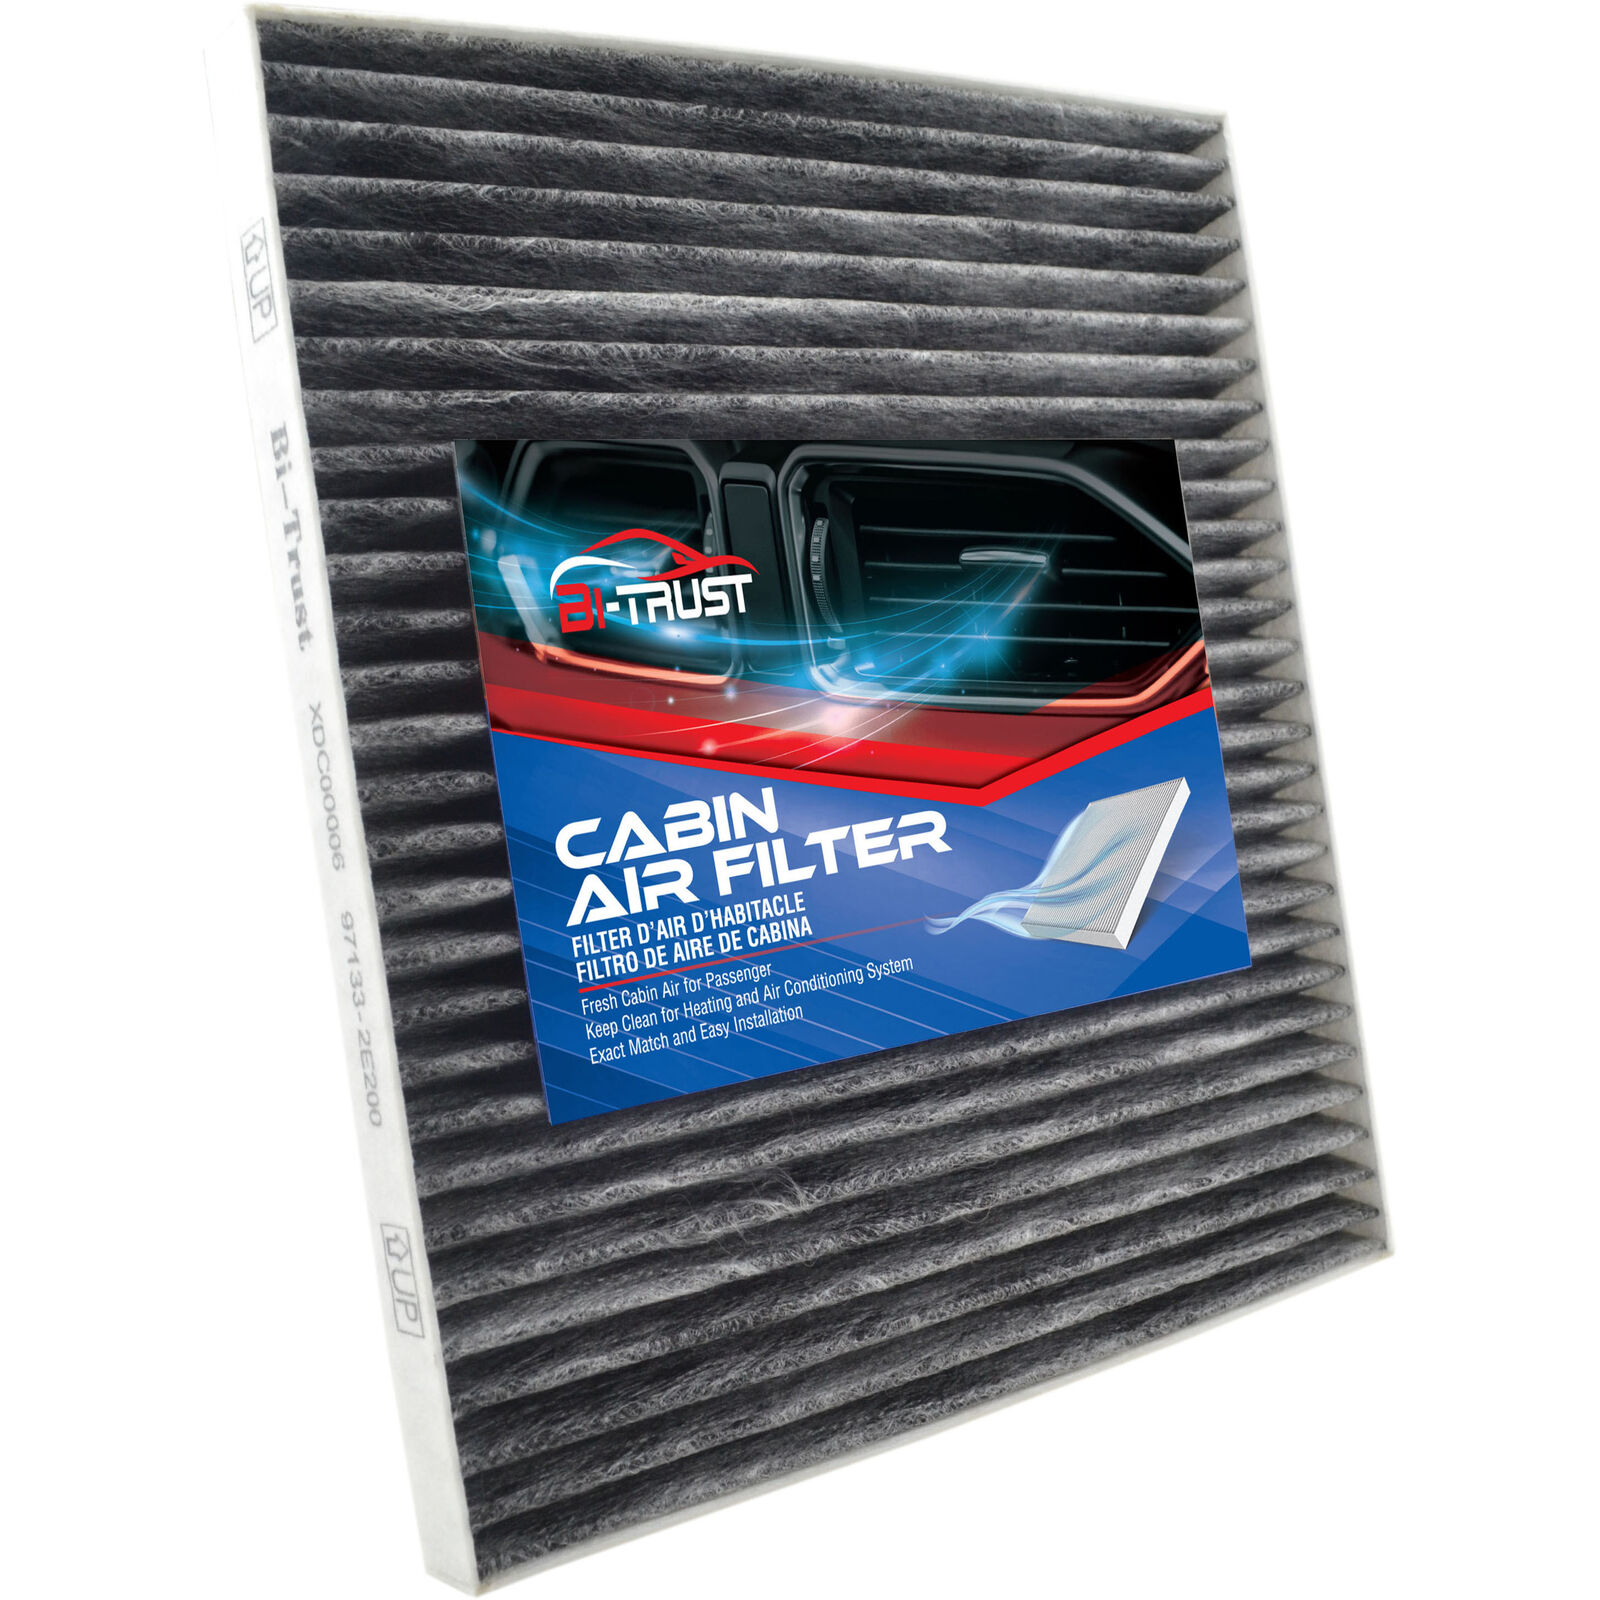 Cabin Air Filter for Hyundai Accent Tucson Genesis Coupe Veloster Kia Sportage